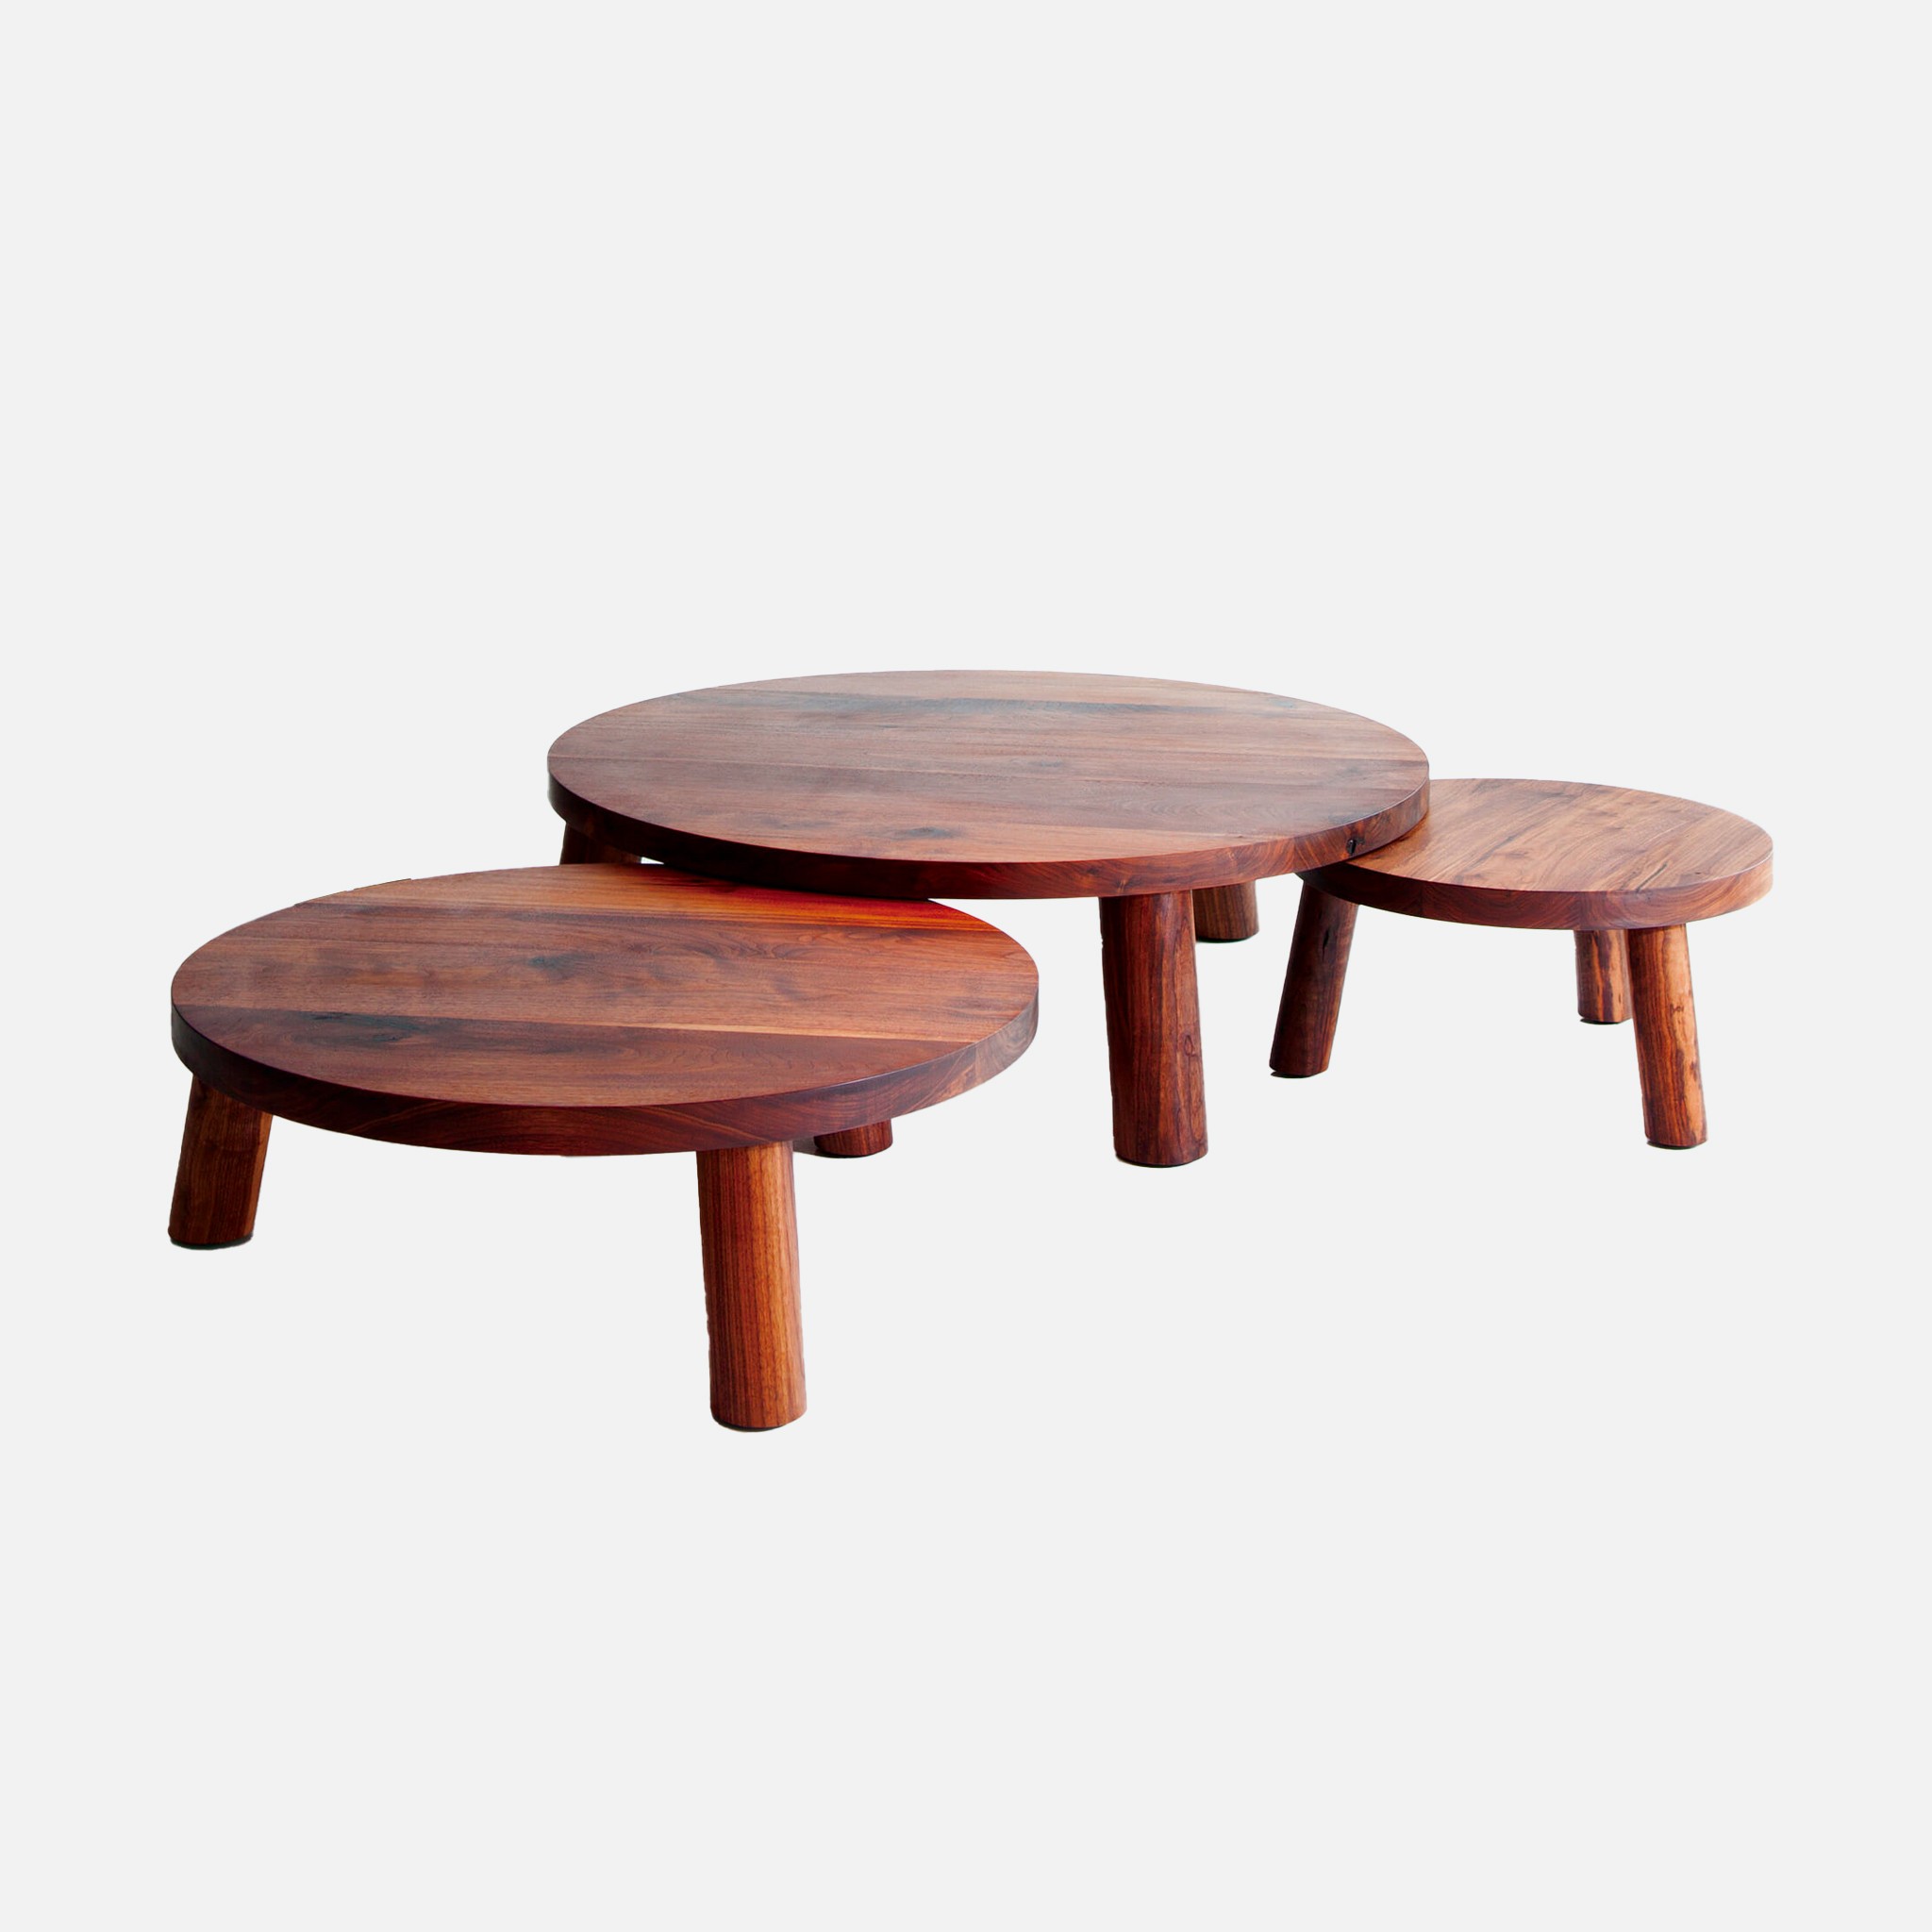 three wooden tables sitting on top of each other